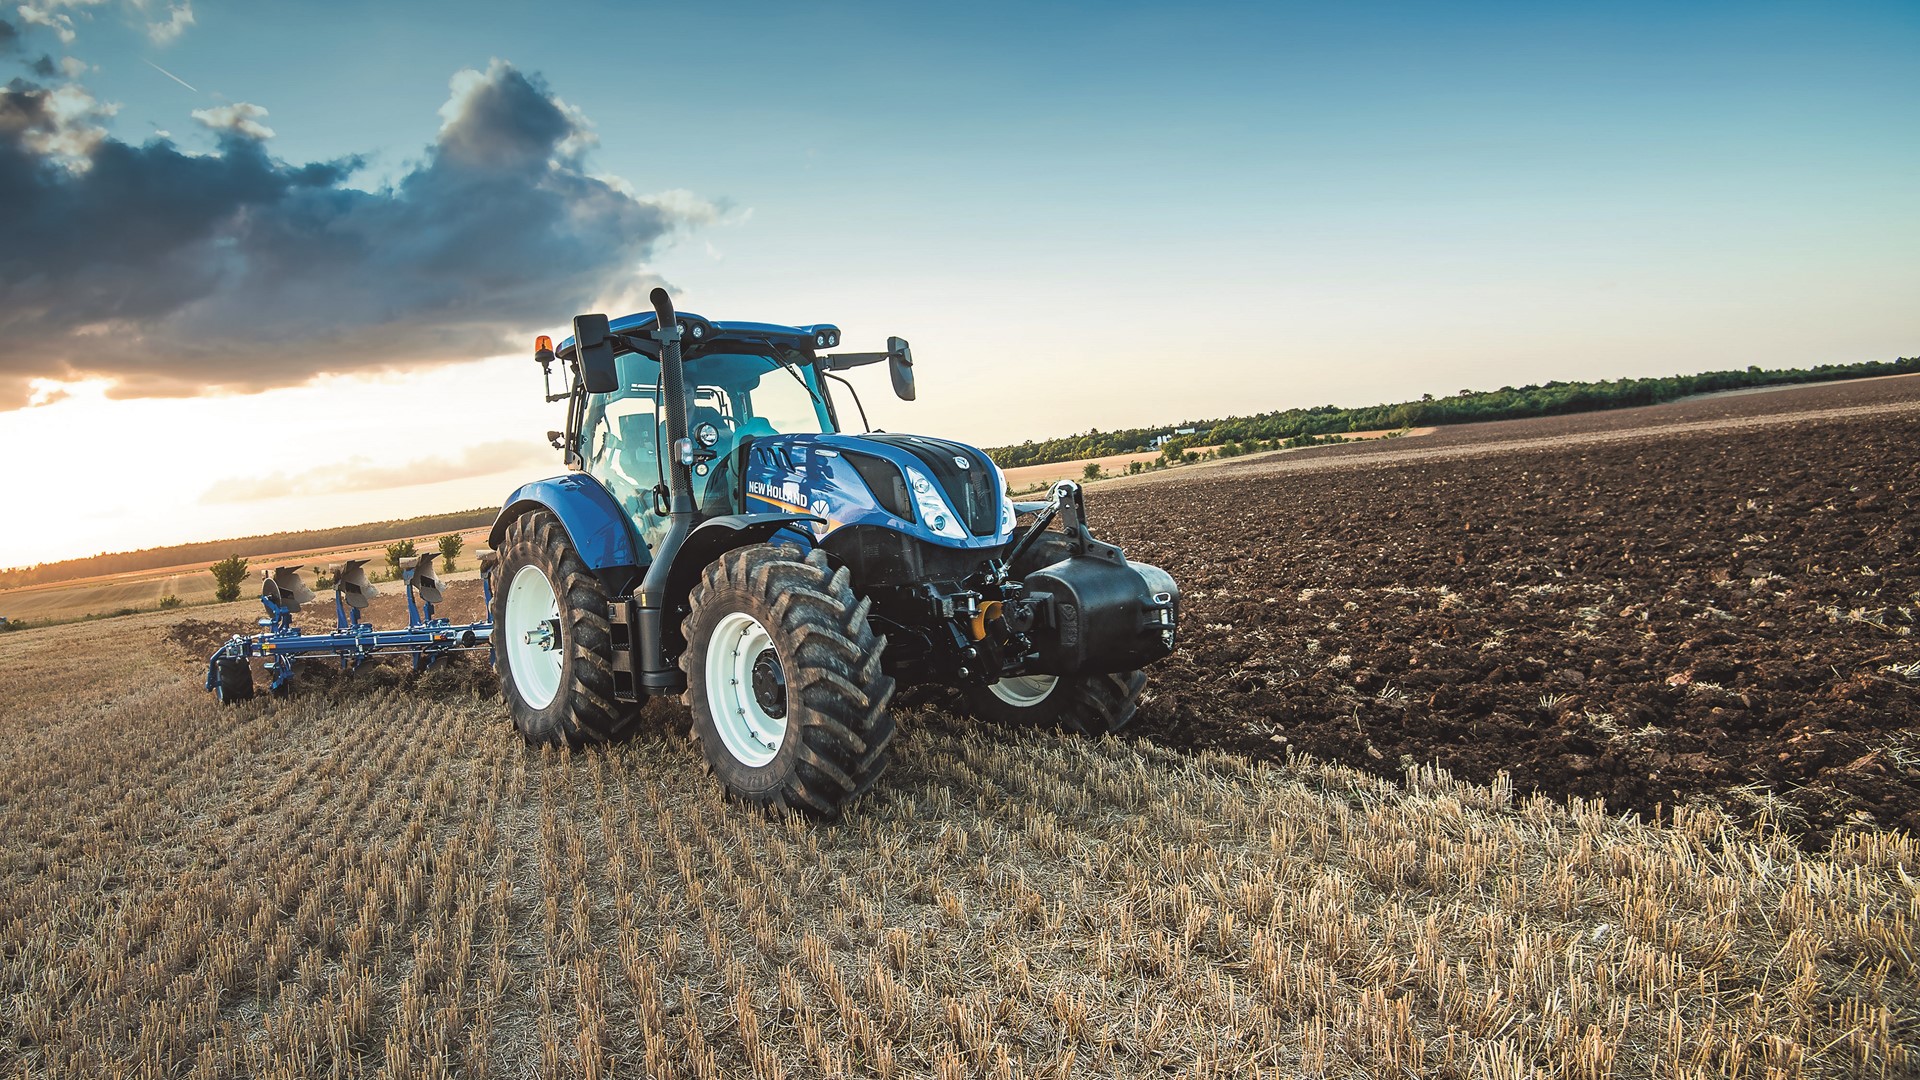 New Holland T6 175 Dynamic Command Tier4B